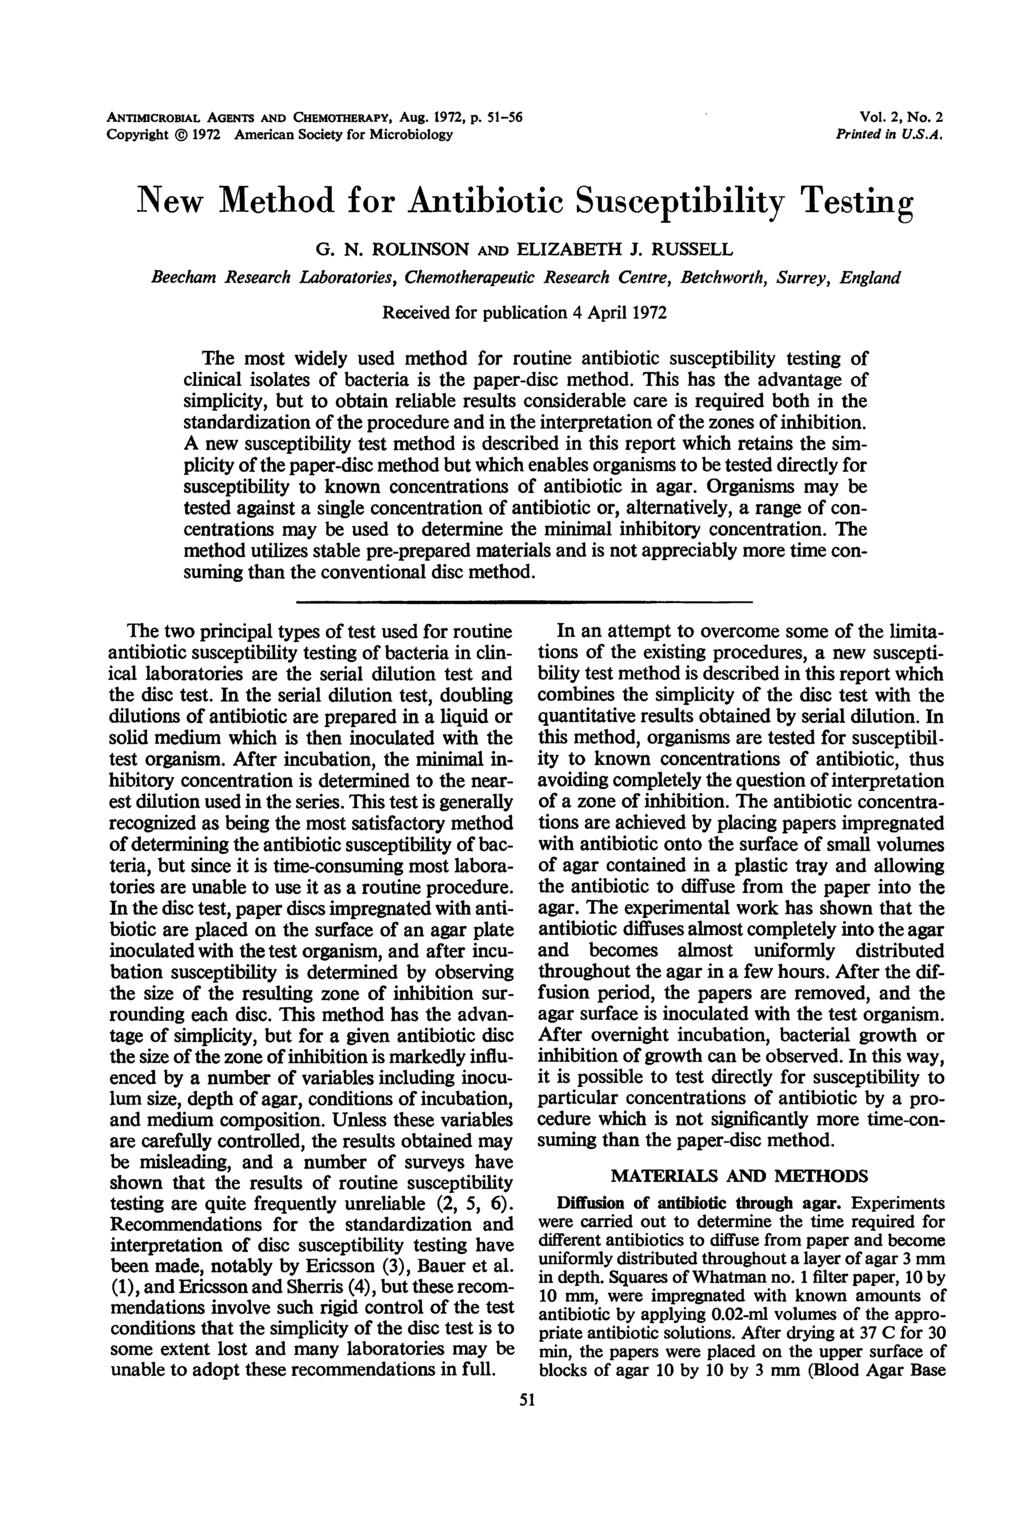 ANTIMIROBIAL AGENTS AND HEMOTHERAPY, Aug. 1972, p. 51-56 opyright 1972 American Society for Microbiology Vol. 2, No. 2 Printed in U.S.A. New Method for Antibiotic Susceptibility Testing G. N. ROLINSON AND ELIZABETH J.